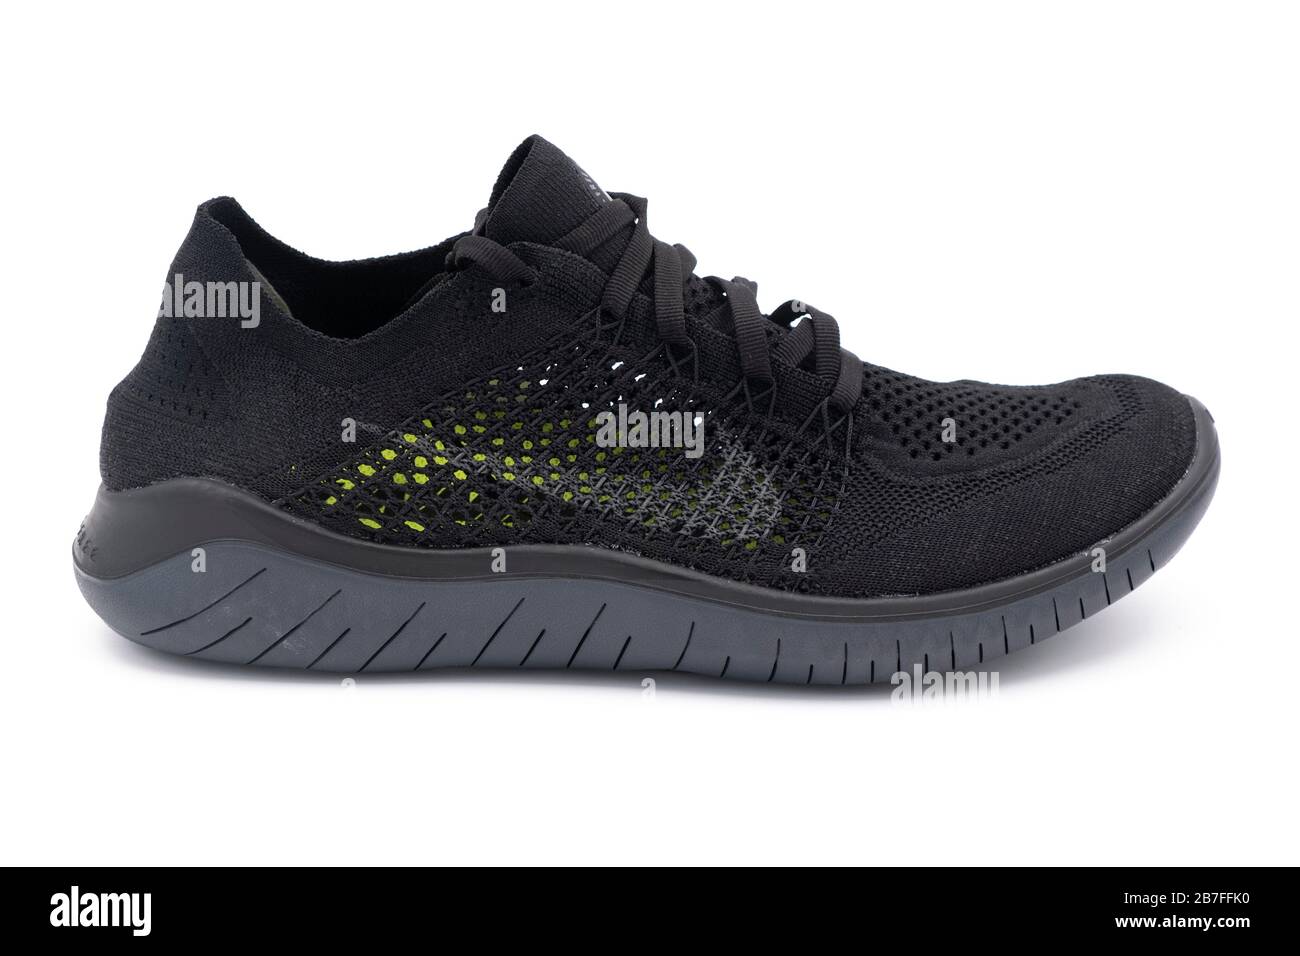 Black Free RN Flyknit ventilated summer sneaker isolated on white background Stock Photo